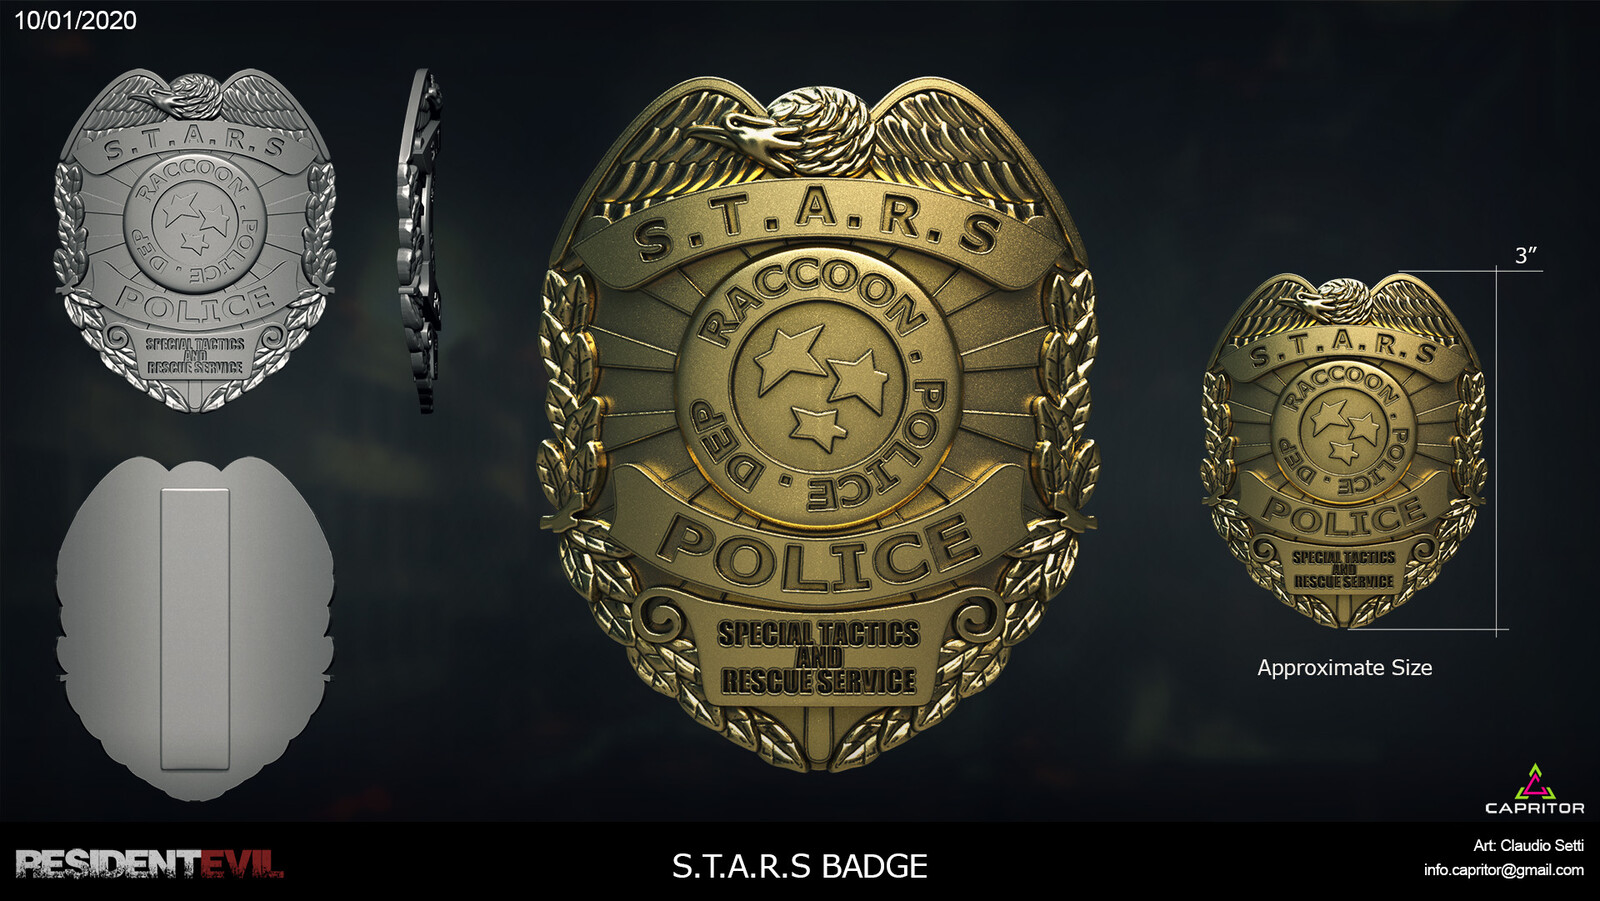 Resident Evil S.T.A.R.S Badge 3D Model And Render